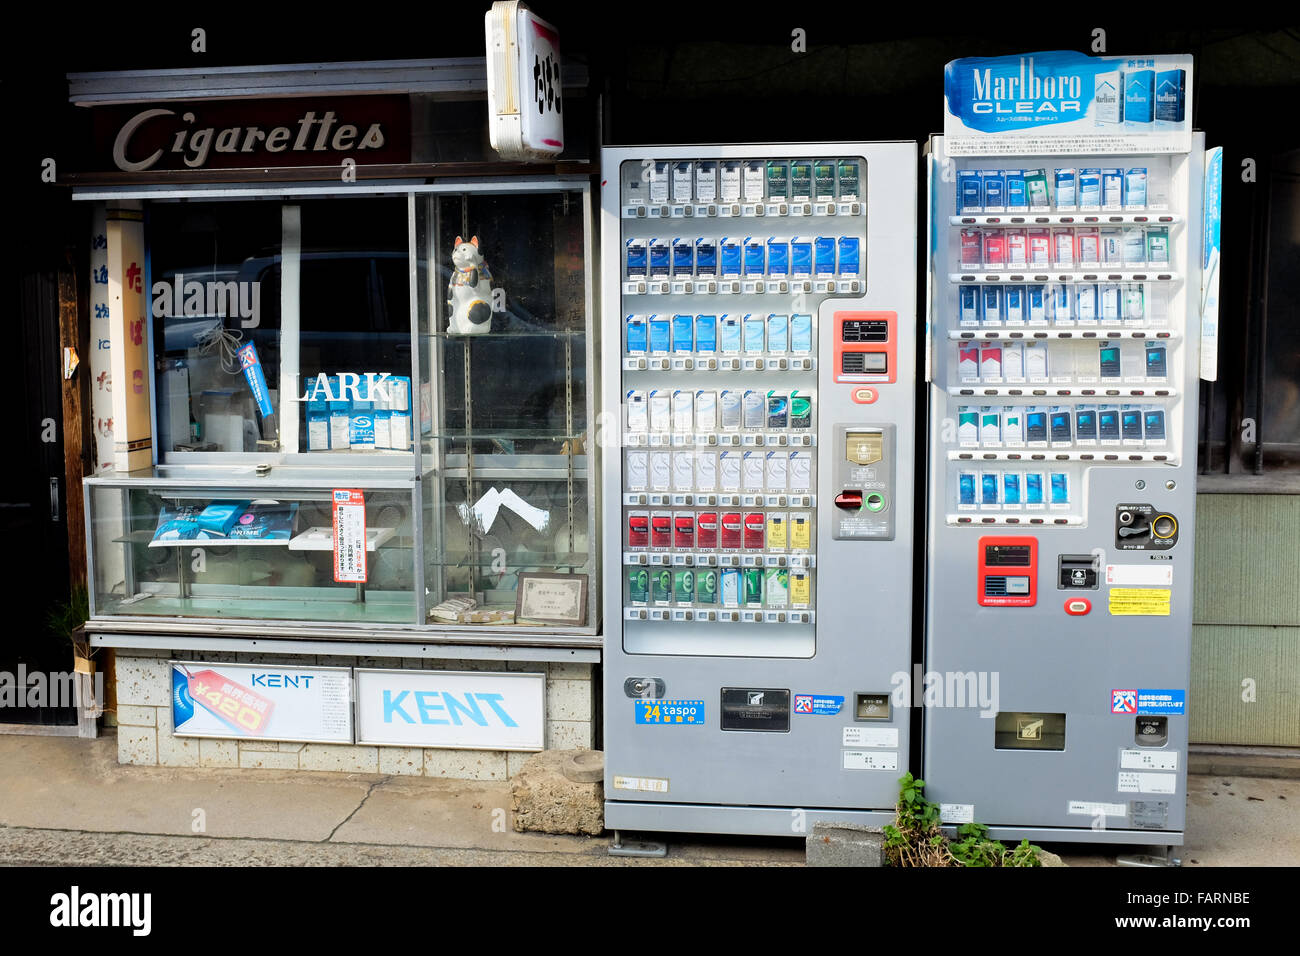 Two cigarette machines and a small booth selling tobacco in Japan. Stock Photo